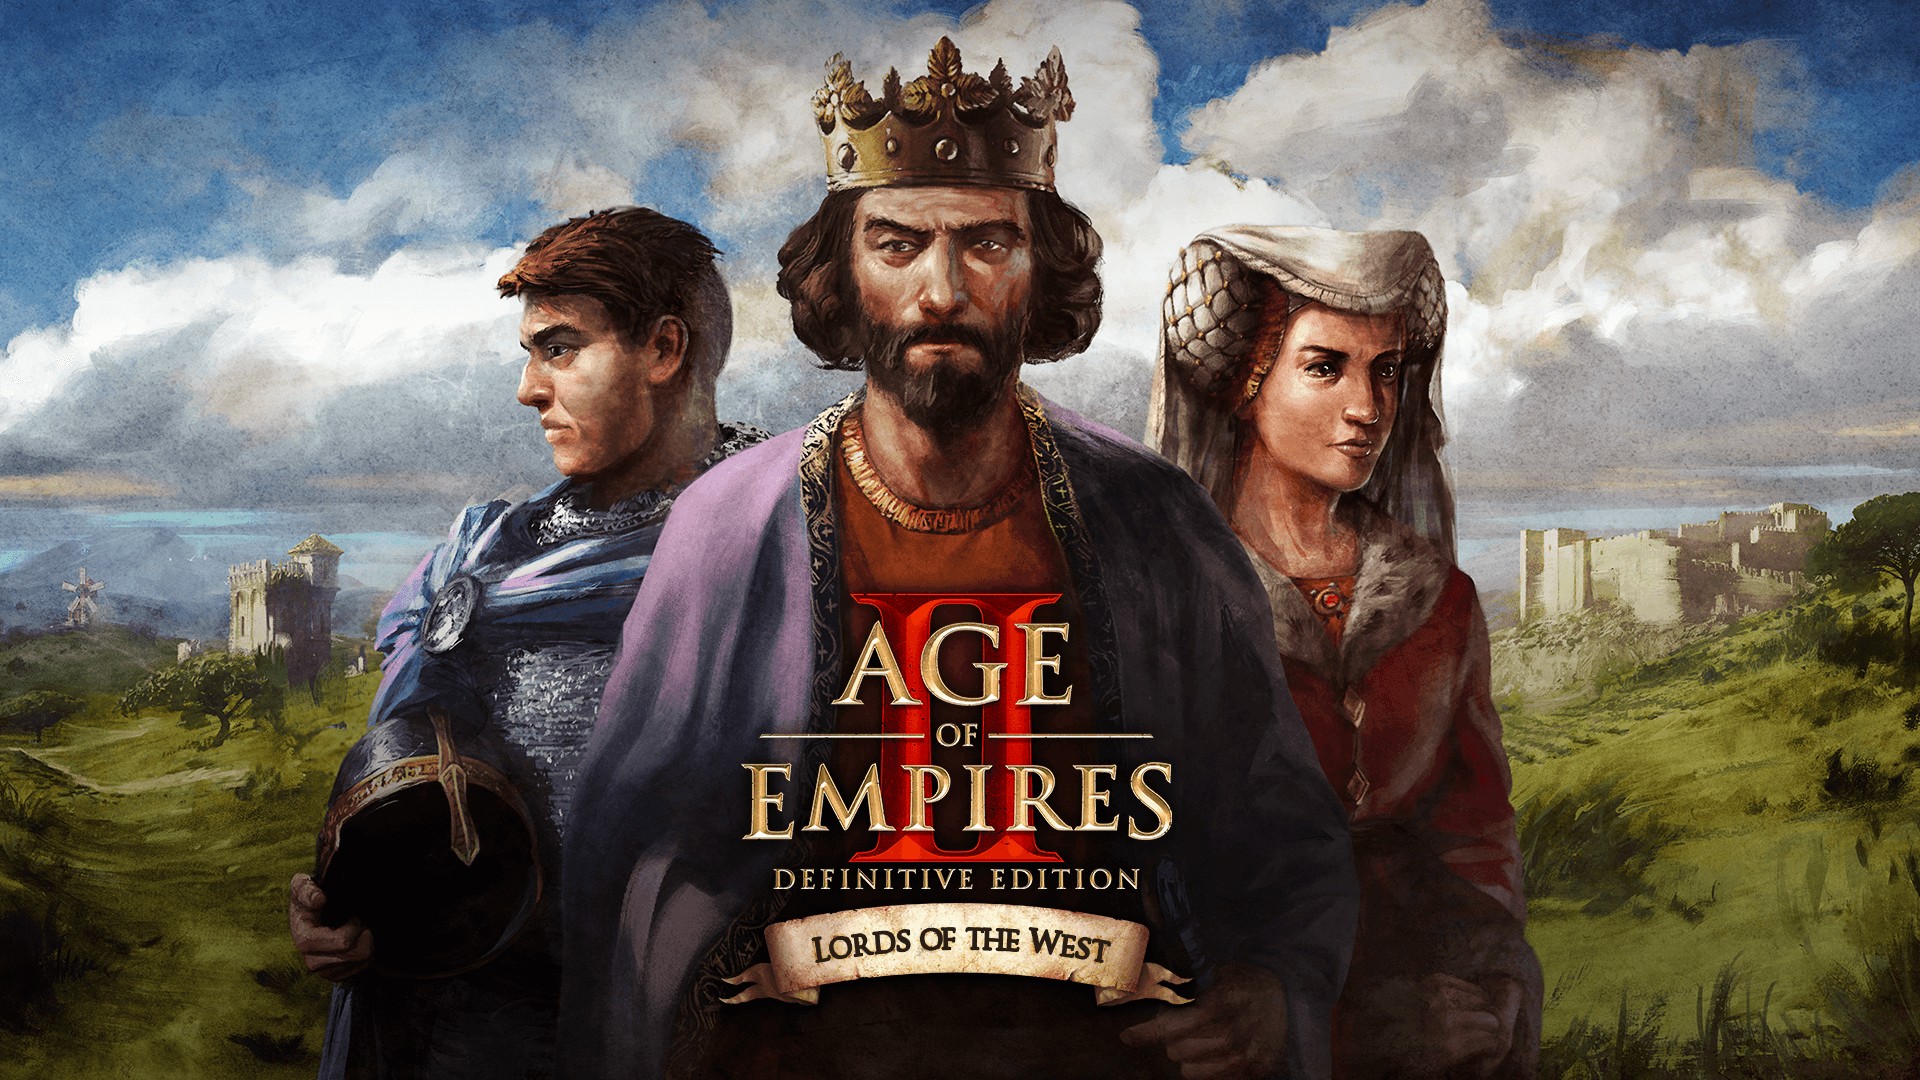 Video For The Lords of the West Have Arrived in Age of Empires II: Definitive Edition, Available Now